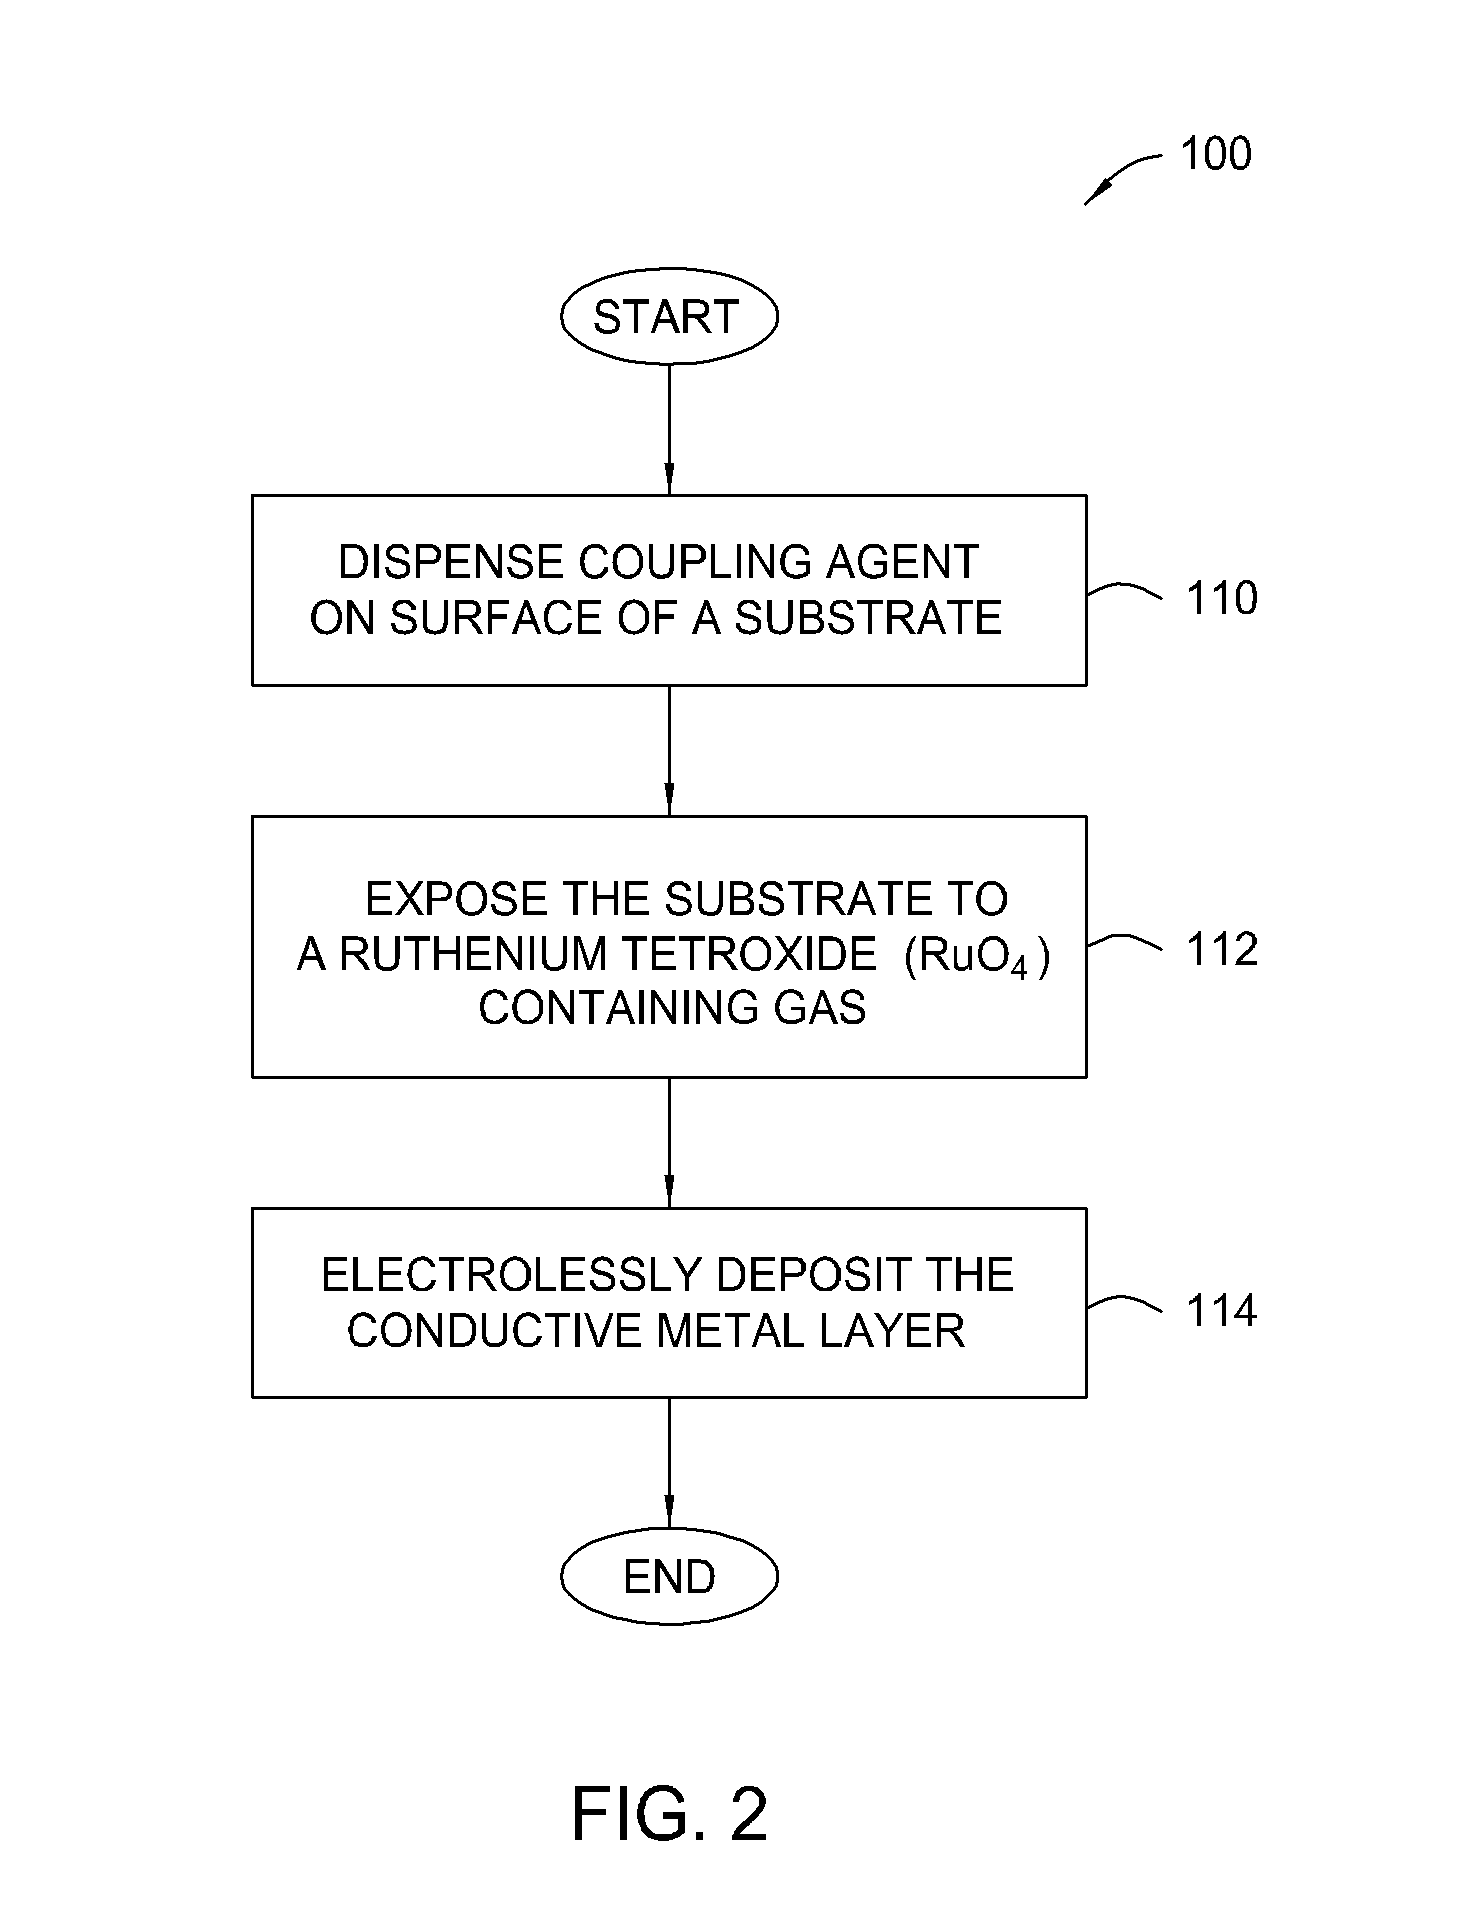 Patterned electroless metallization processes for large area electronics